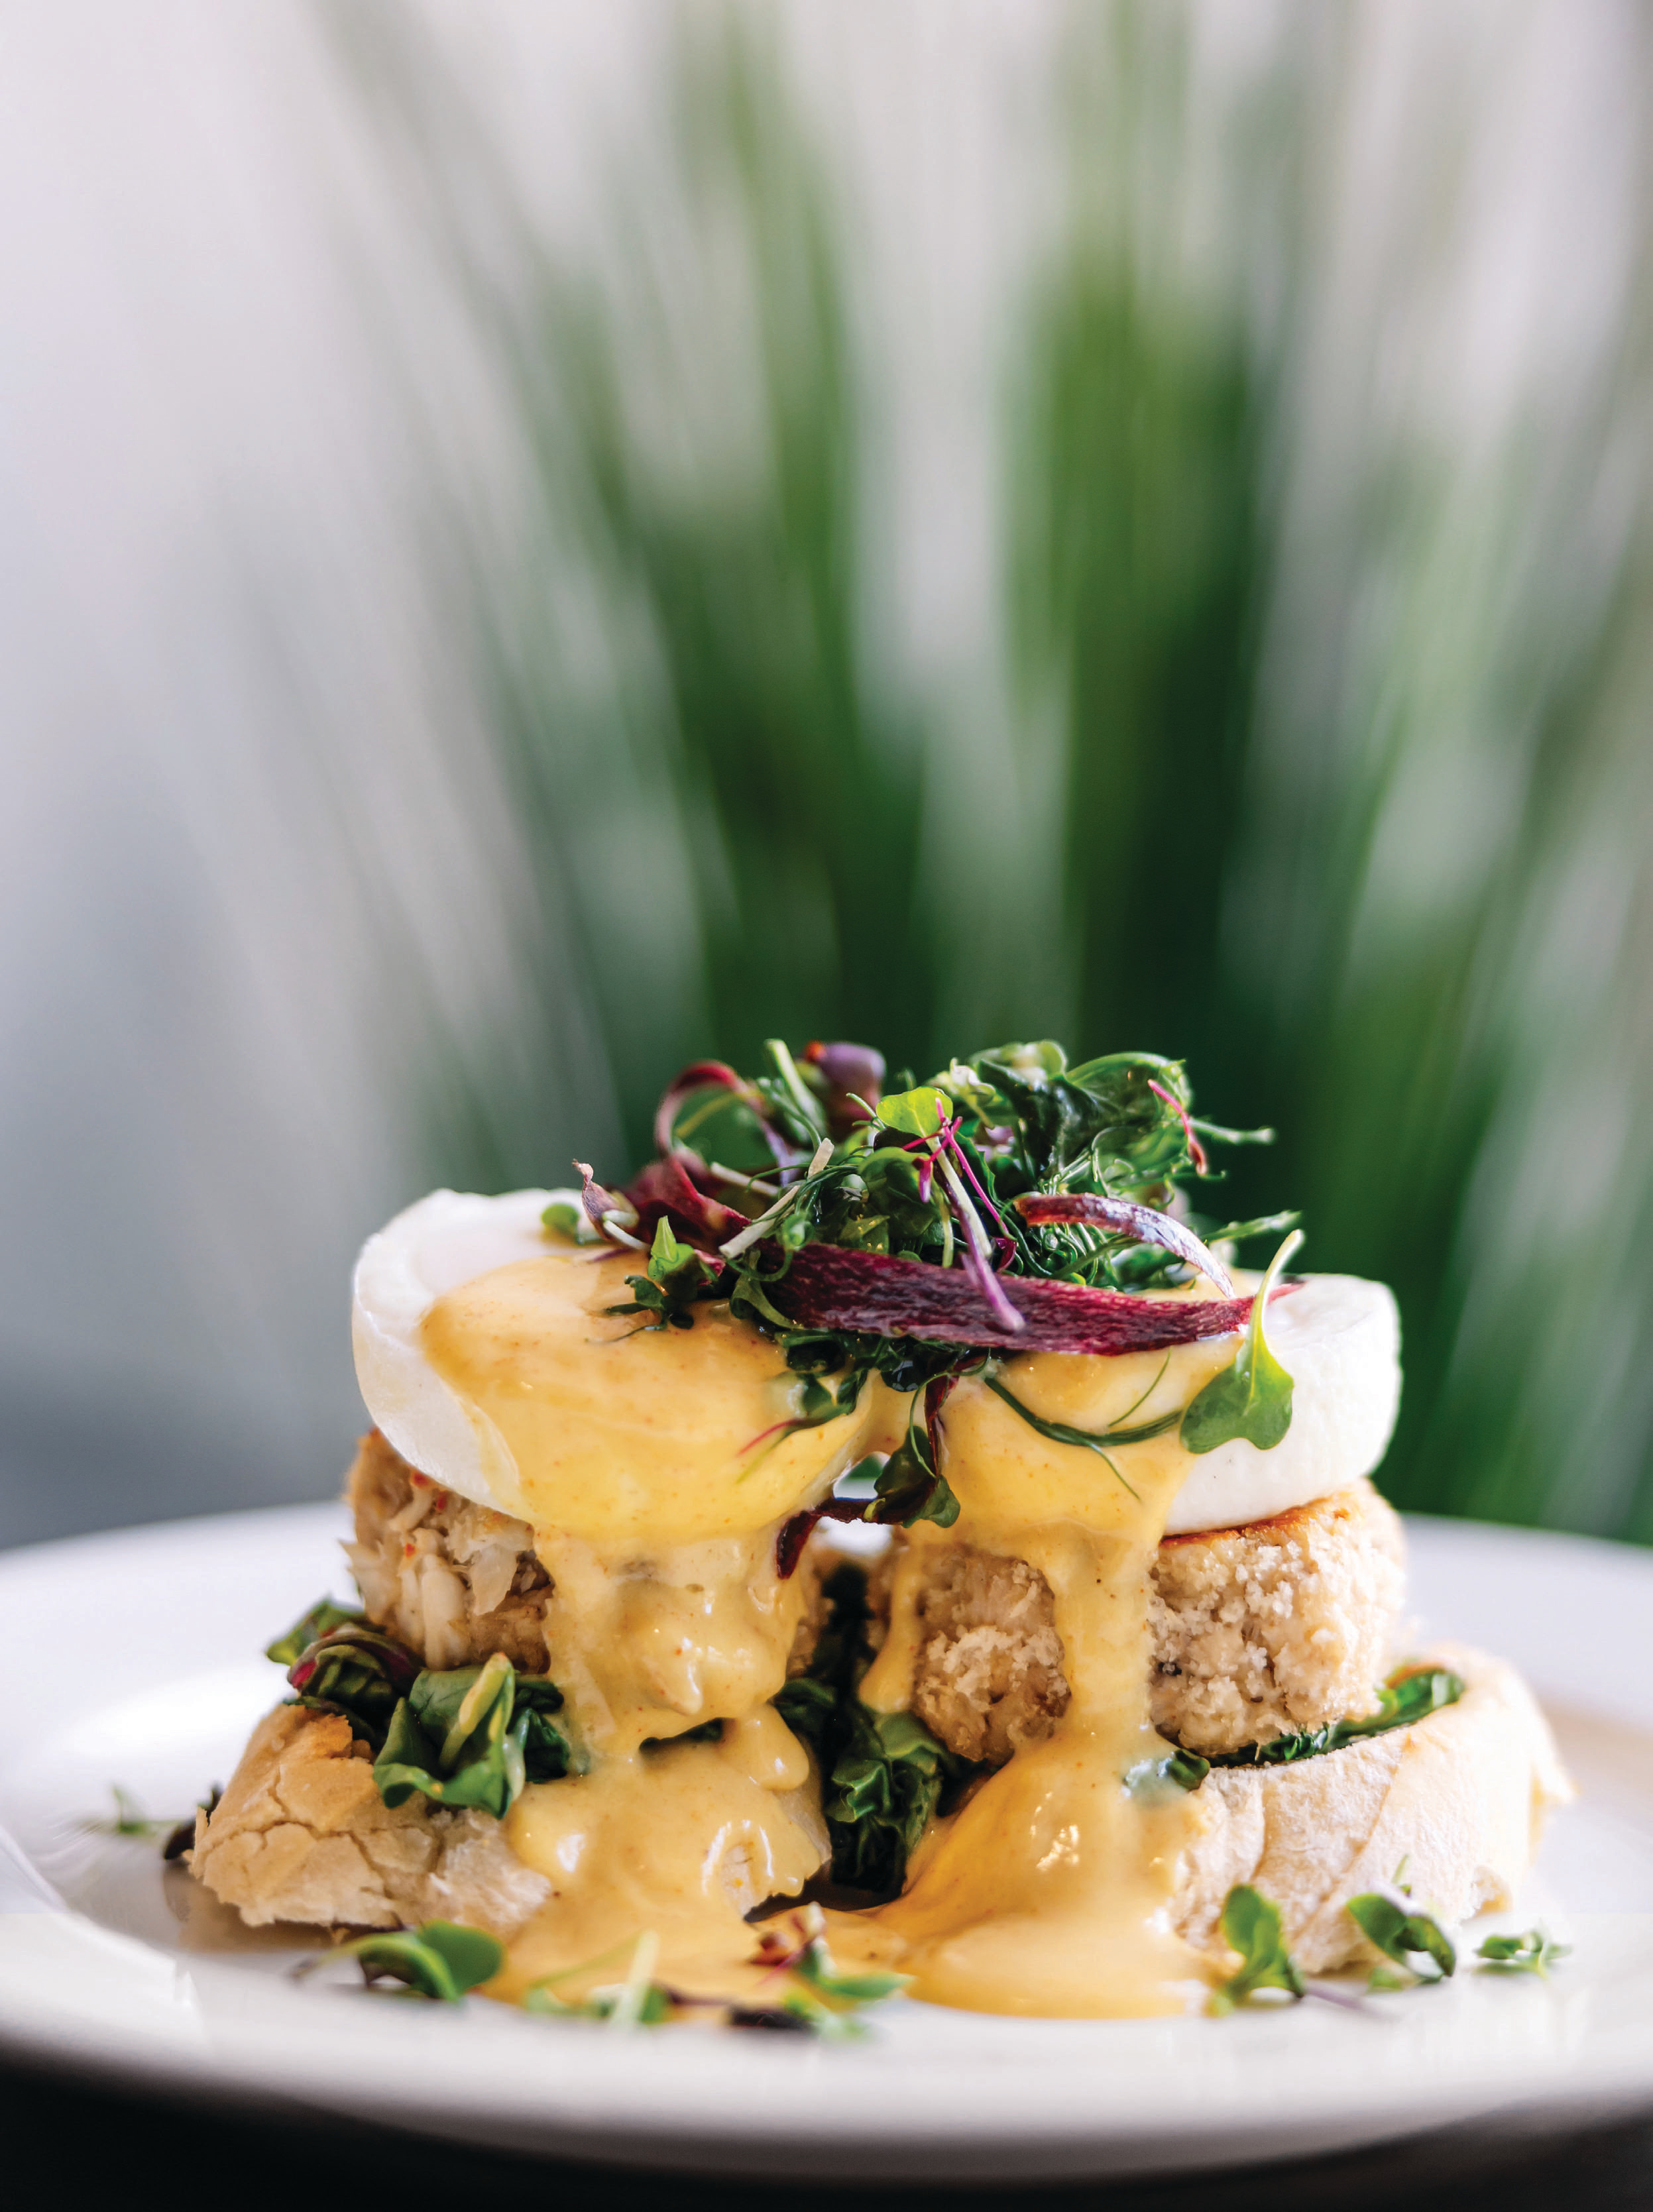 Zollie’s Jazz Cucina reflects the flavors of the Caribbean and the South. For instance, eggs Benedict features crab cakes, collard crisps and creole hollandaise.